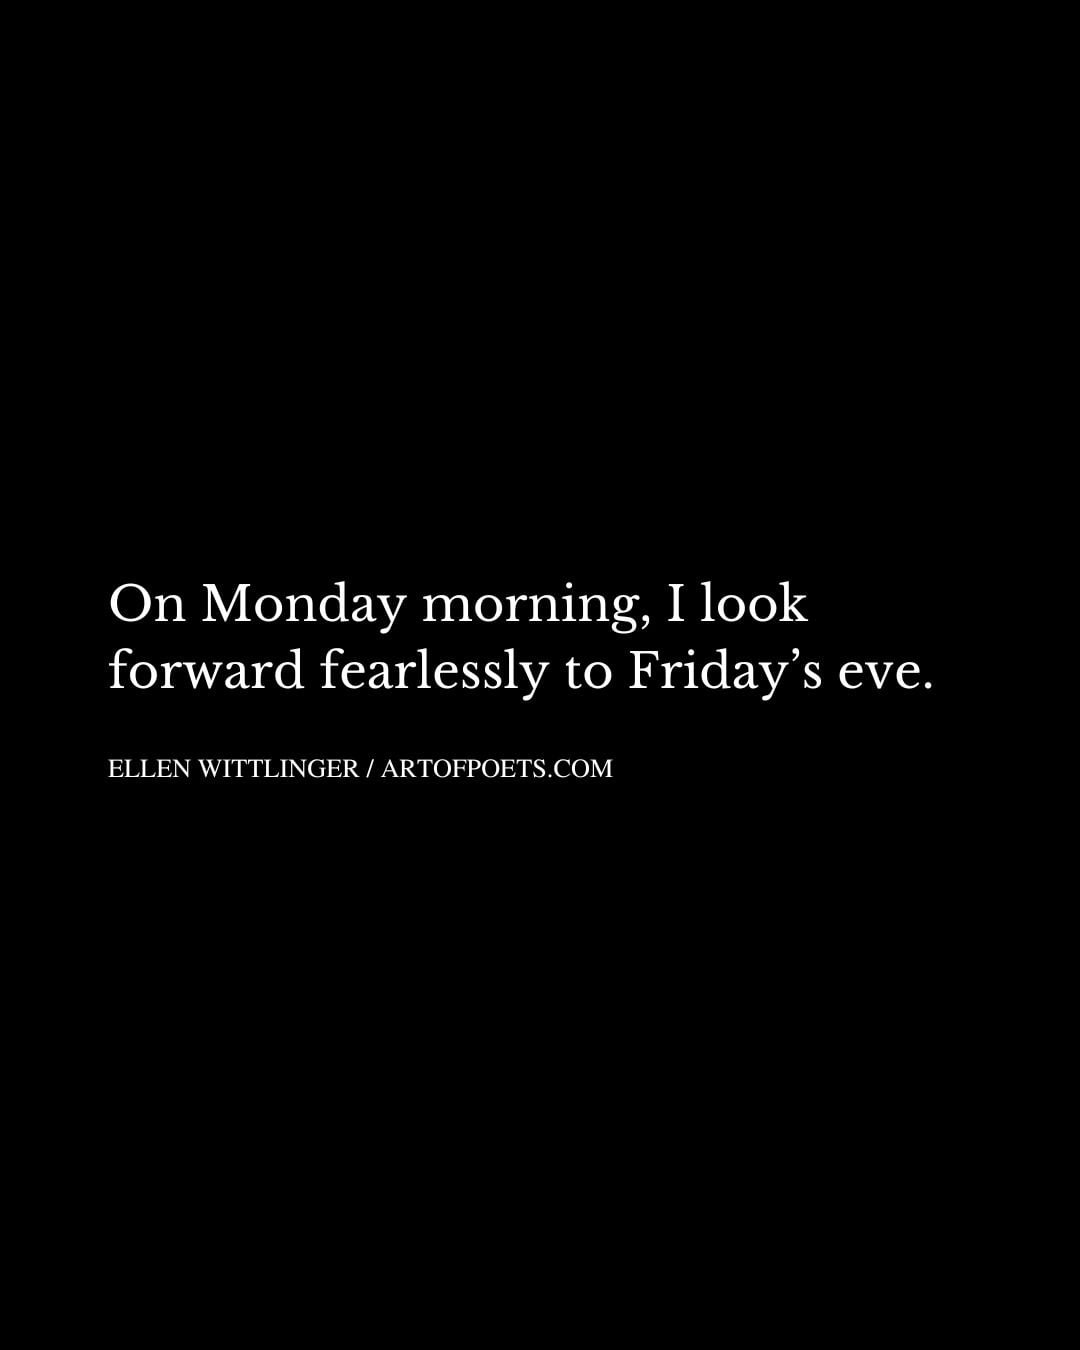 On Monday morning I look forward fearlessly to Fridays eve